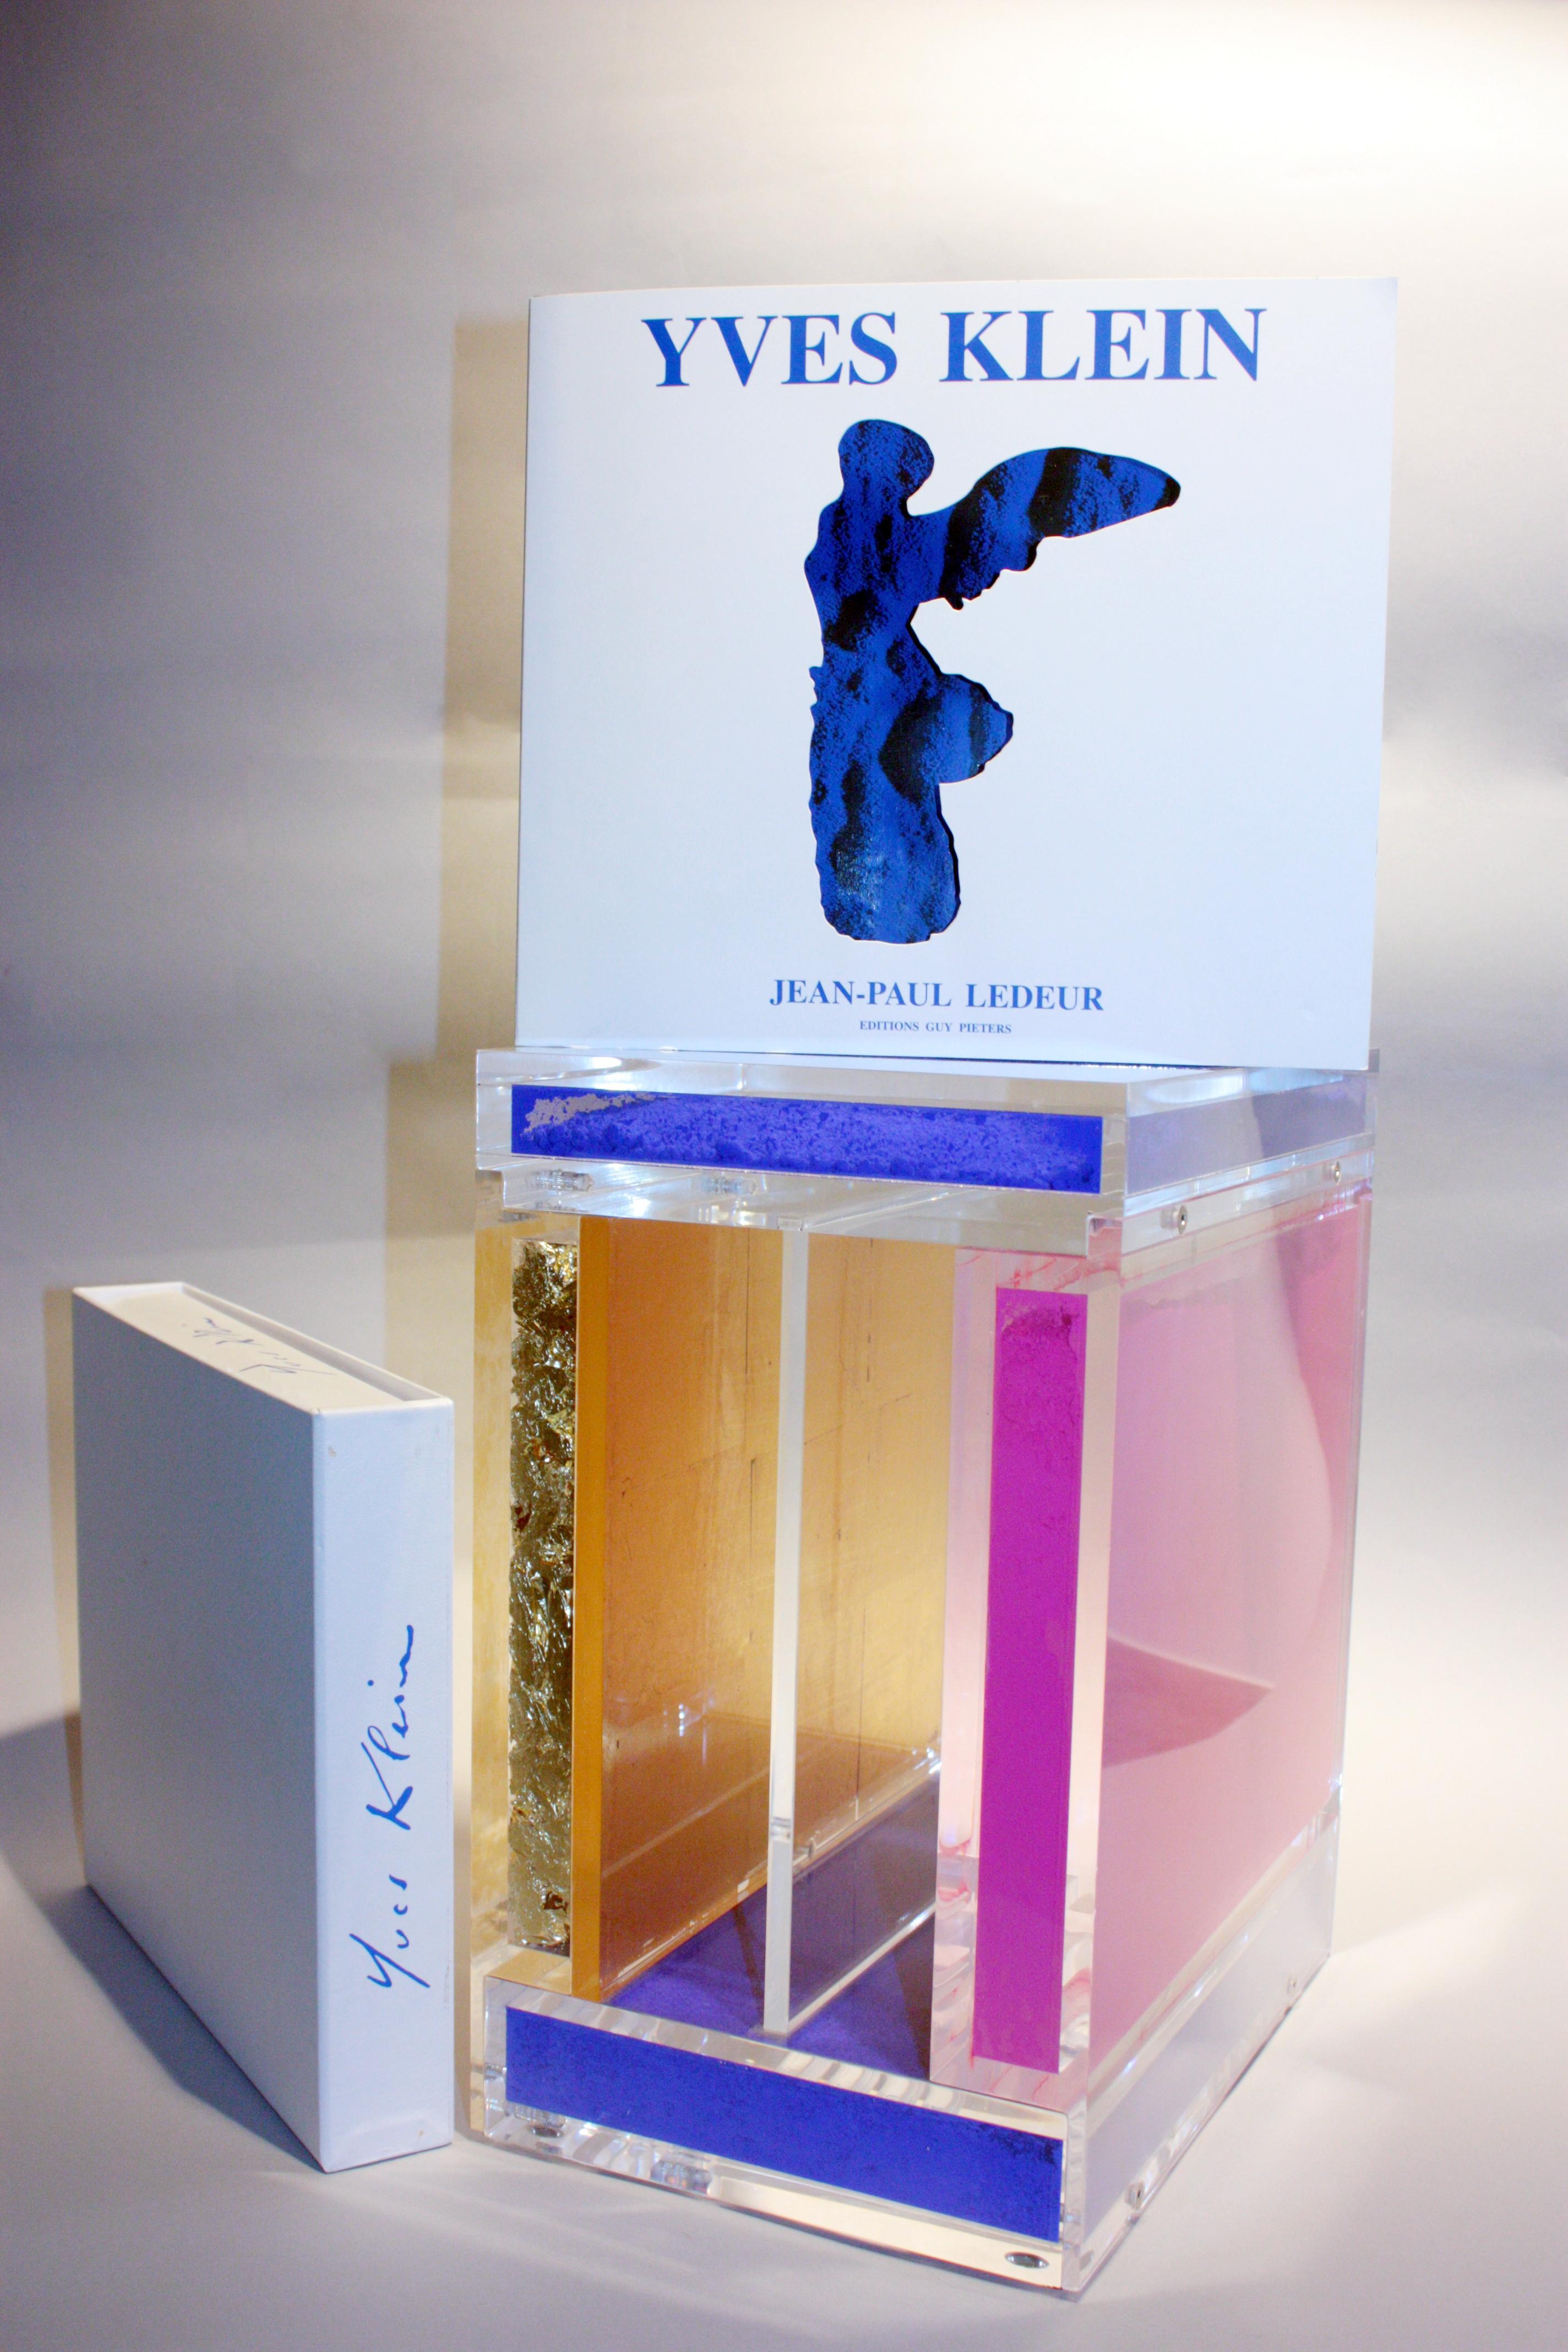 Yves Klein, Catalogue Raisonné
Plexiglas box with raw blue and pink pigments and gold leaves.
Edited in 2000.
Numbered from the edition of 440, the deluxe edition of the Catalogue Raisonné des Éditions et Sculptures de Yves Klein by Jean-Paul